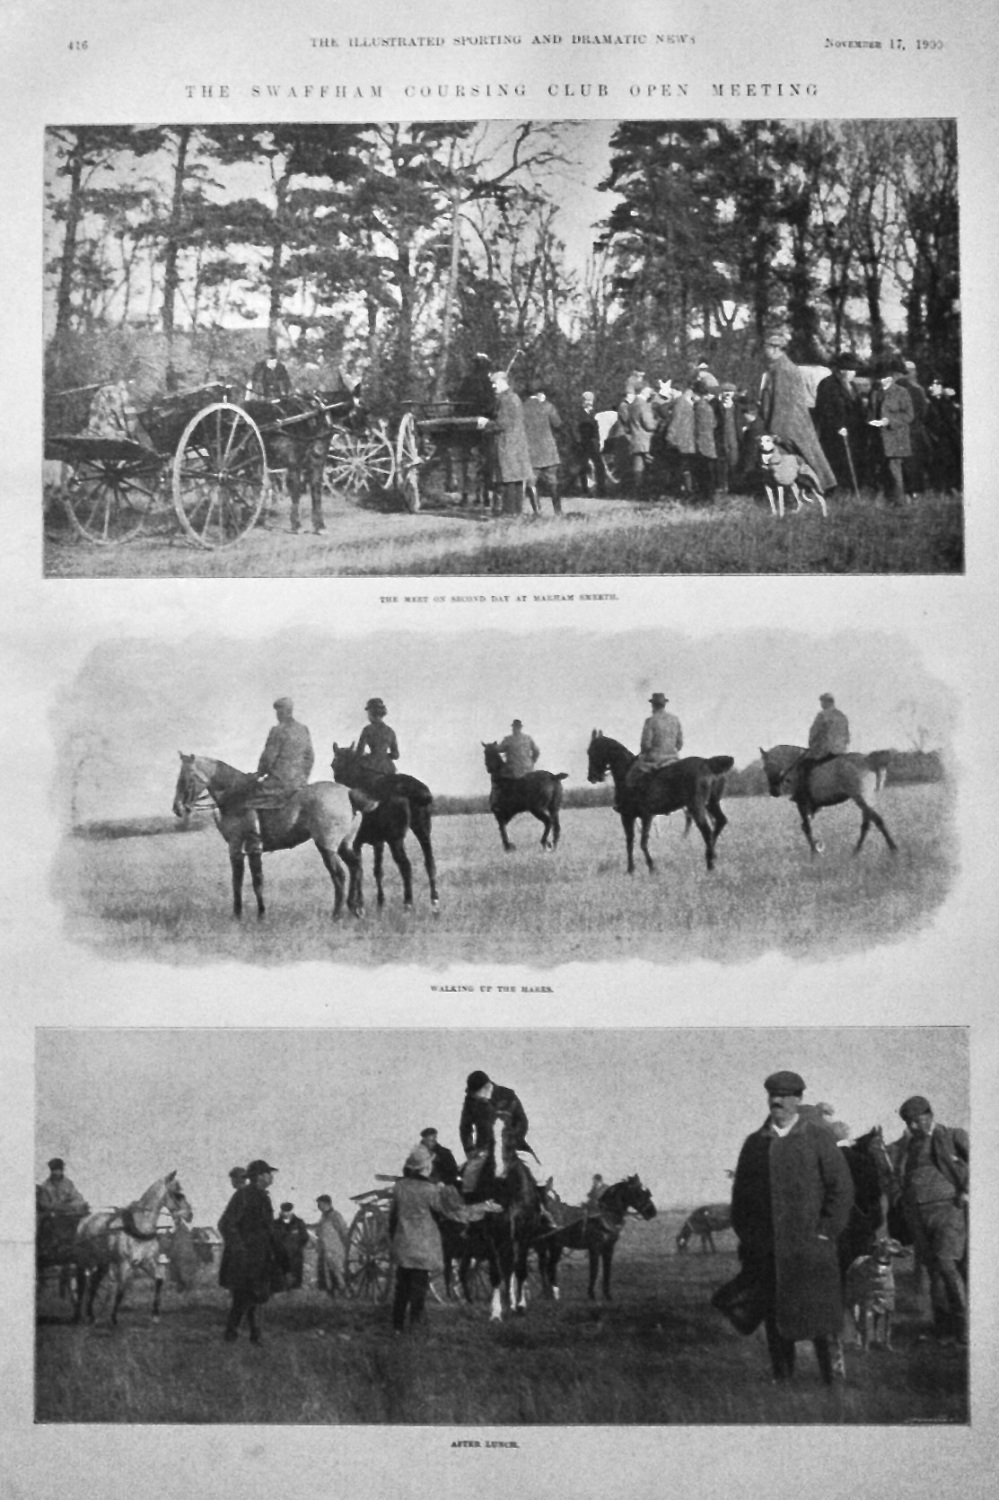 The Swaffham Coursing Club Open Meeting.  1900.